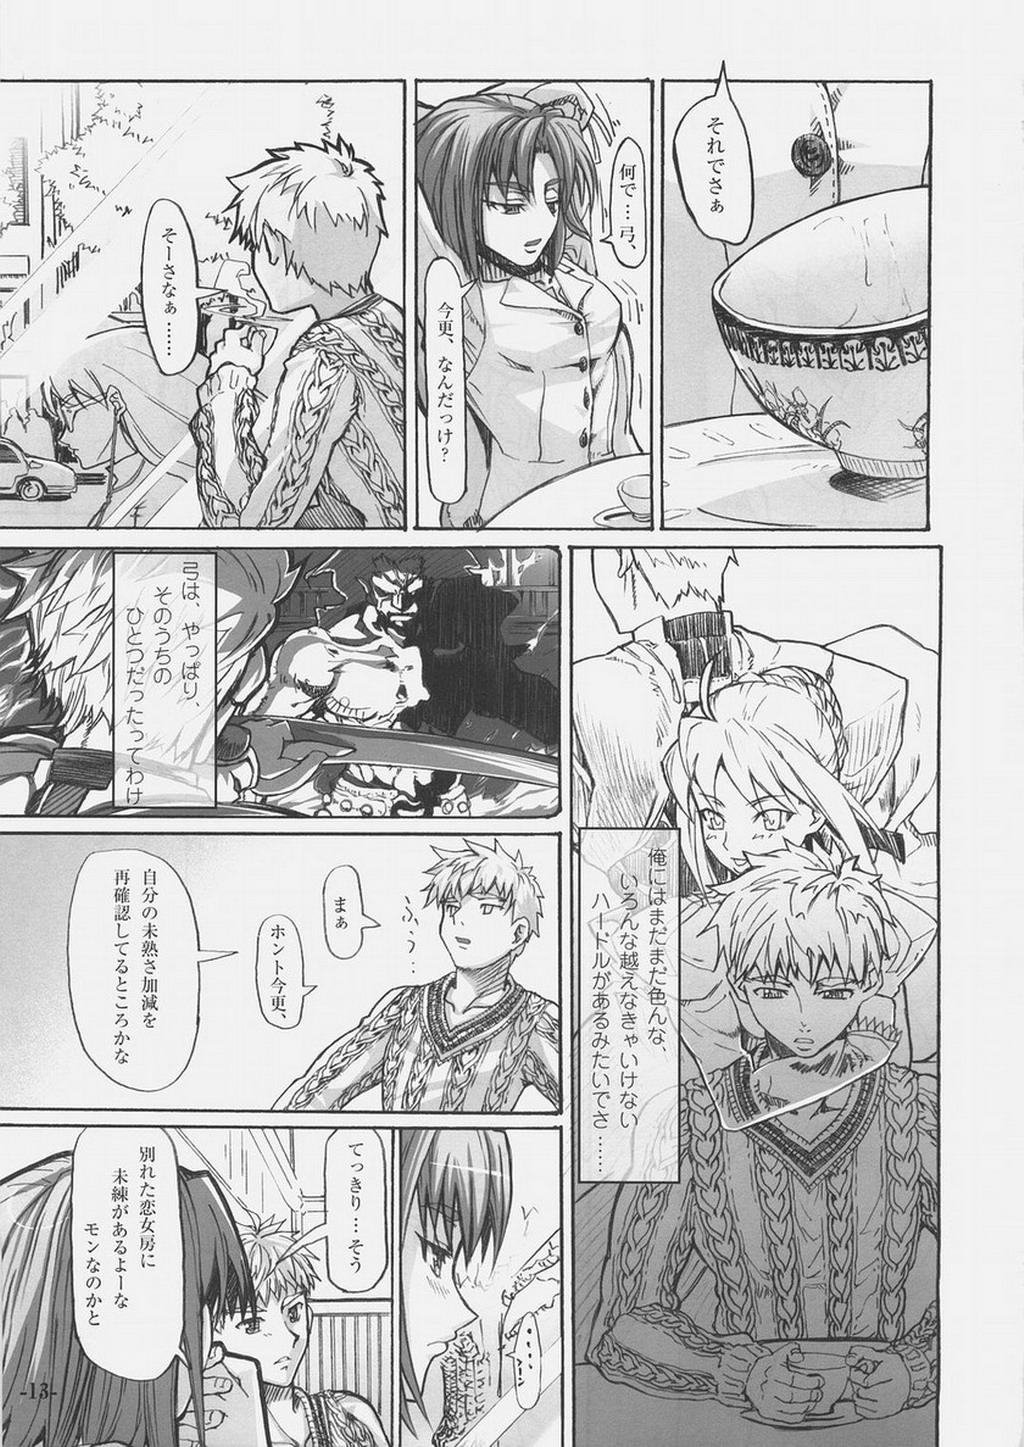 Titties Light Her Fire! - Fate stay night Amature Allure - Page 12